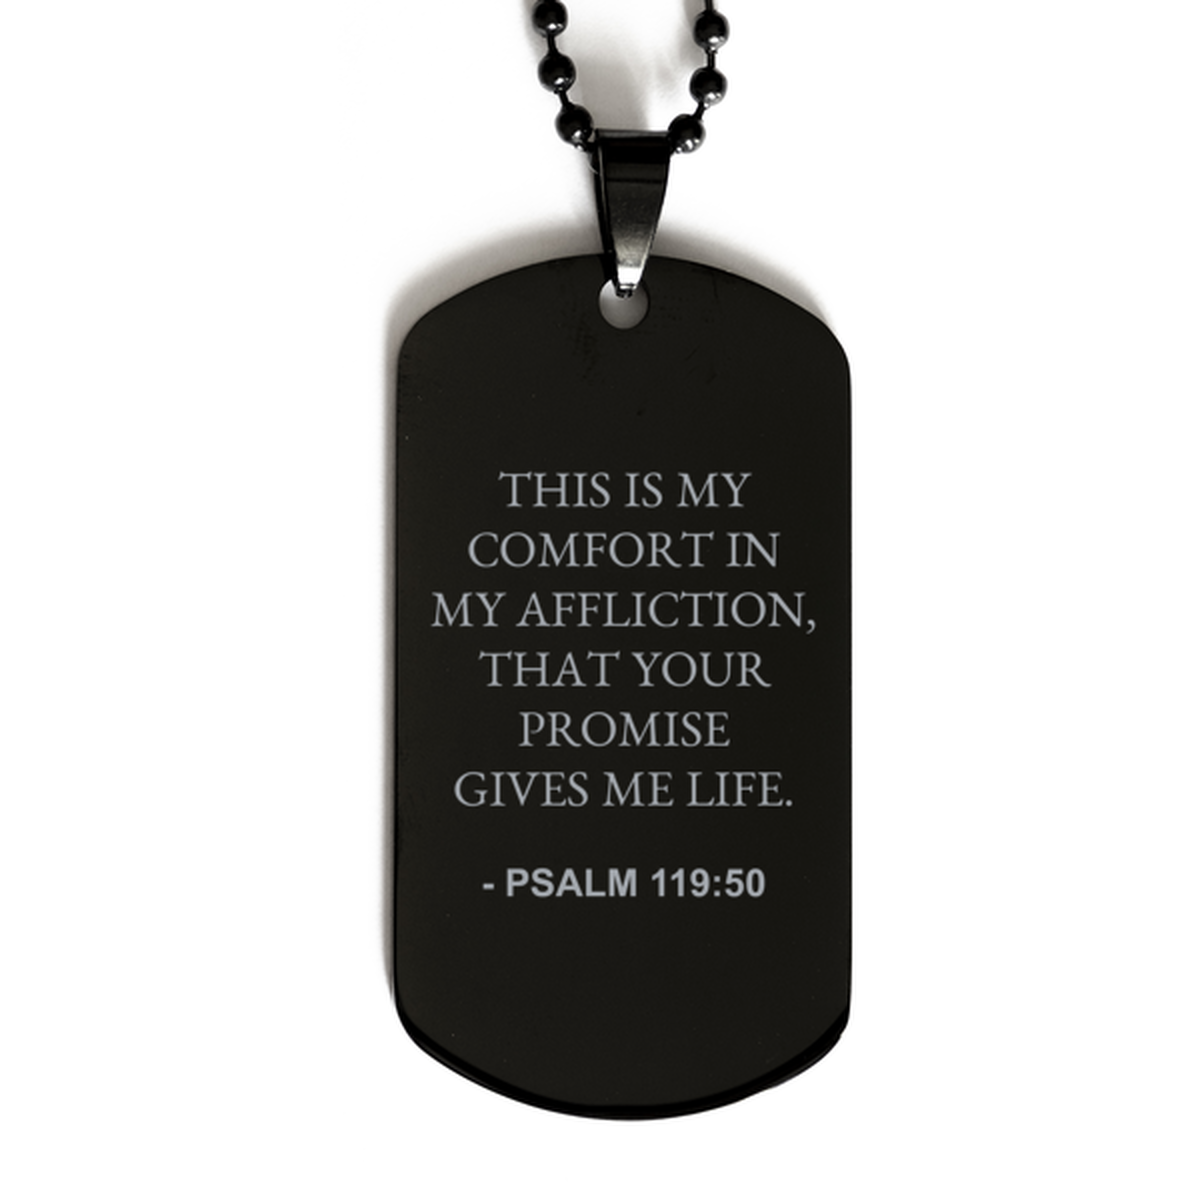 Bible Verse Black Dog Tag, Psalm 119:50 This Is My Comfort In My Affliction, That Your, Christian Inspirational Necklace Gifts For Men Women